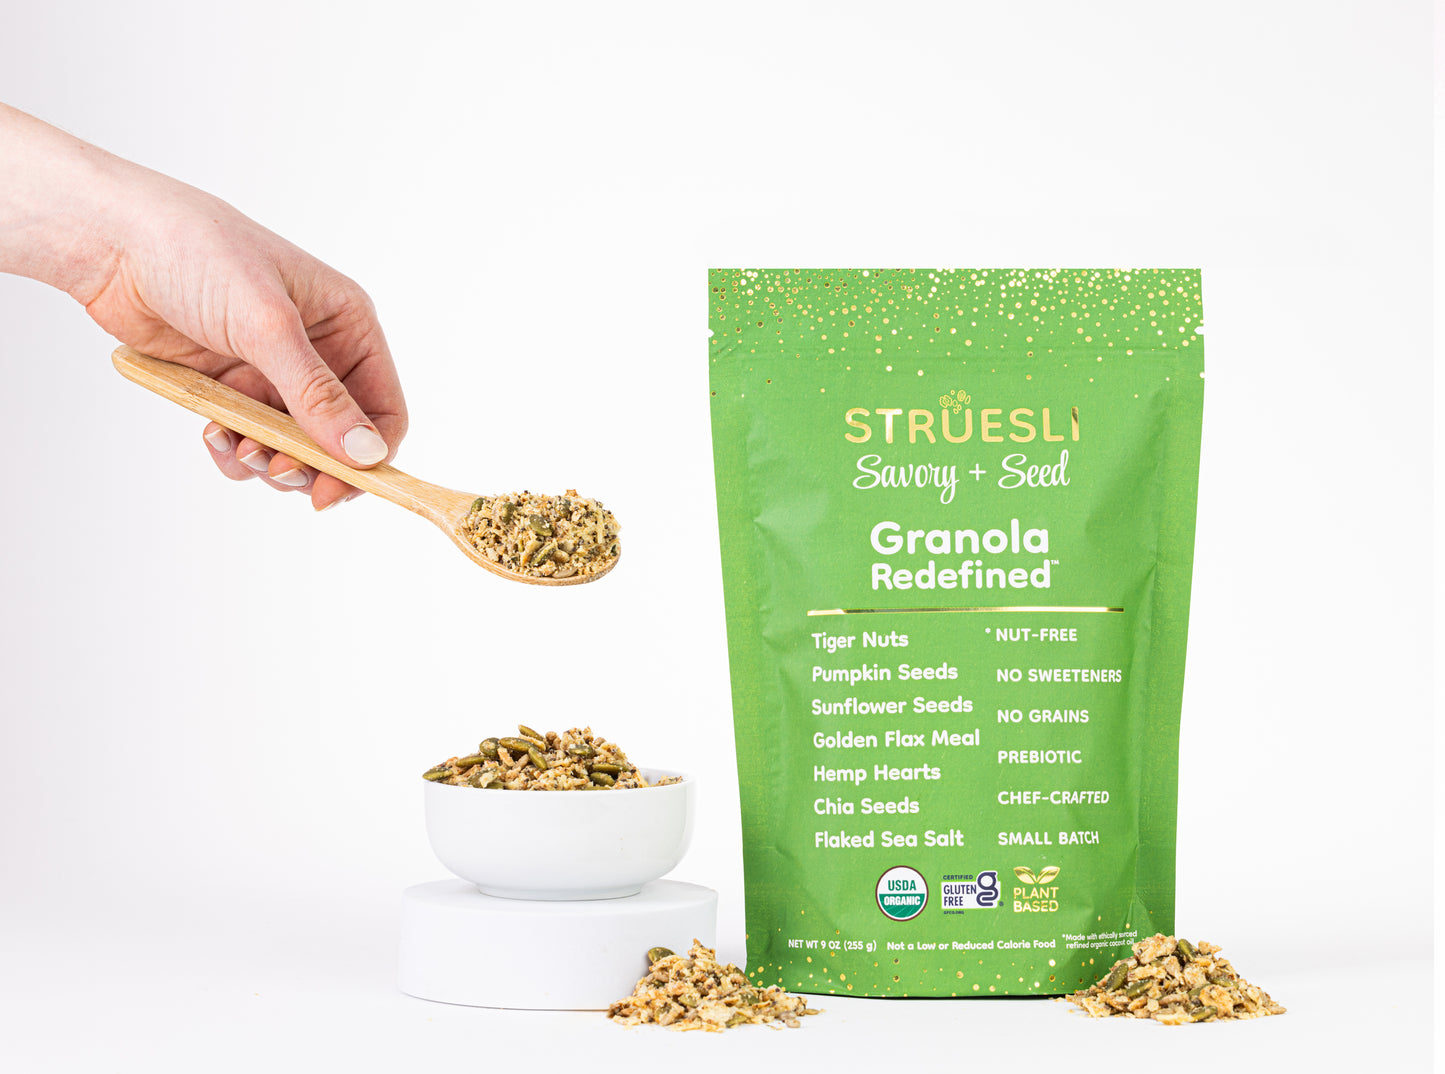 A package of Struesli Savory + Seed granola next to a bowl and spoonful of granola